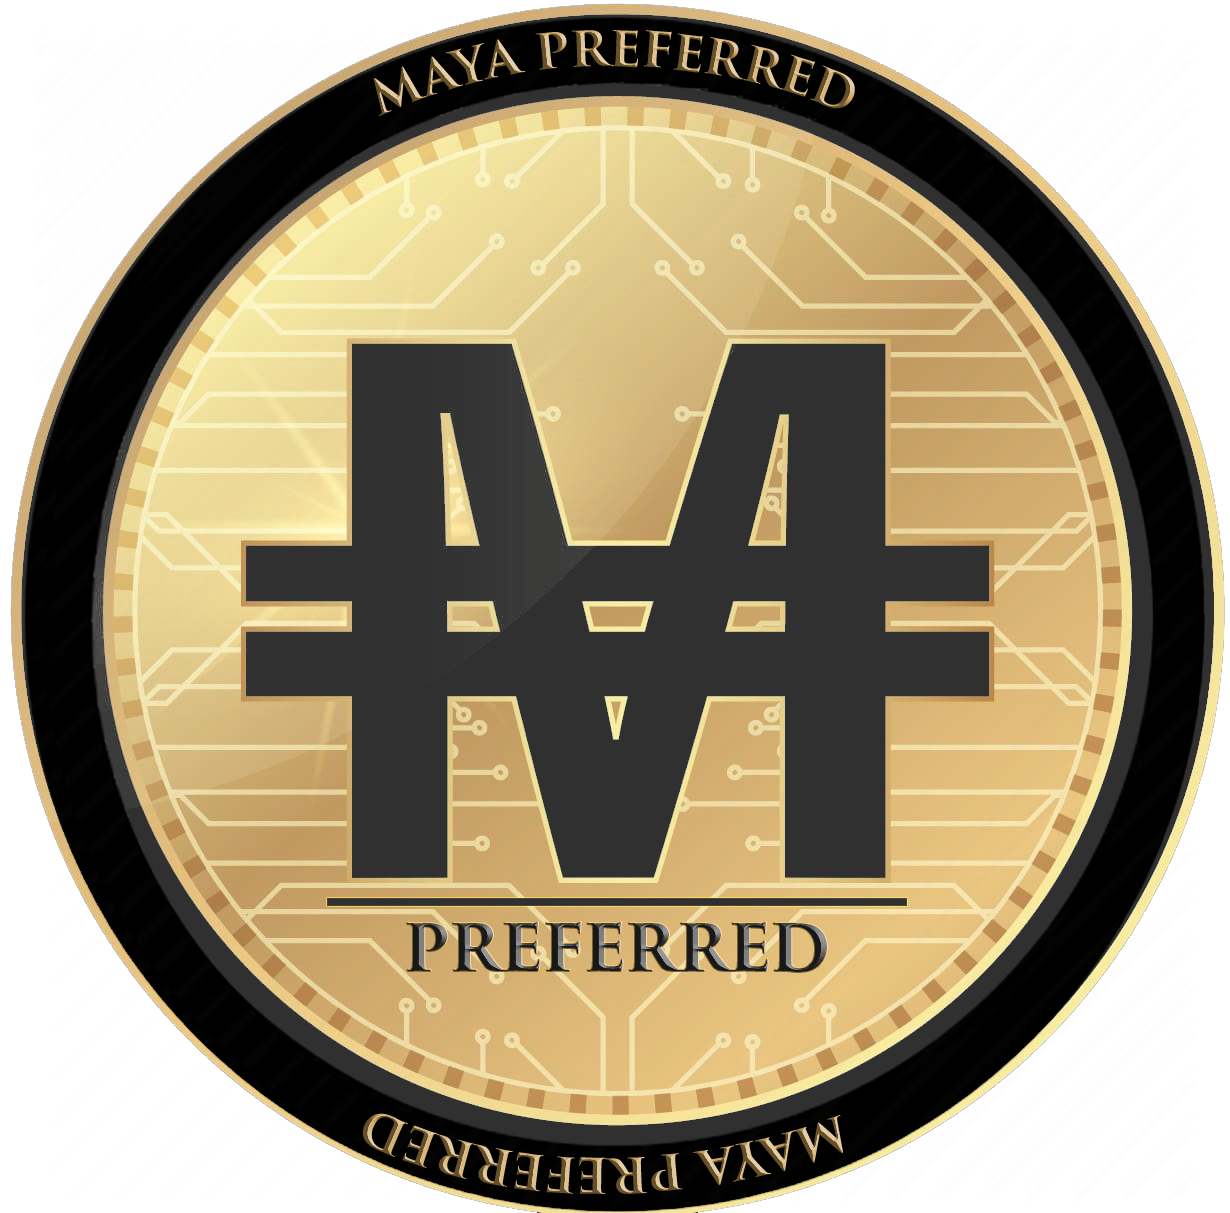 Maya Preferred 223 does what no other Cryptocurrency has ever done before 